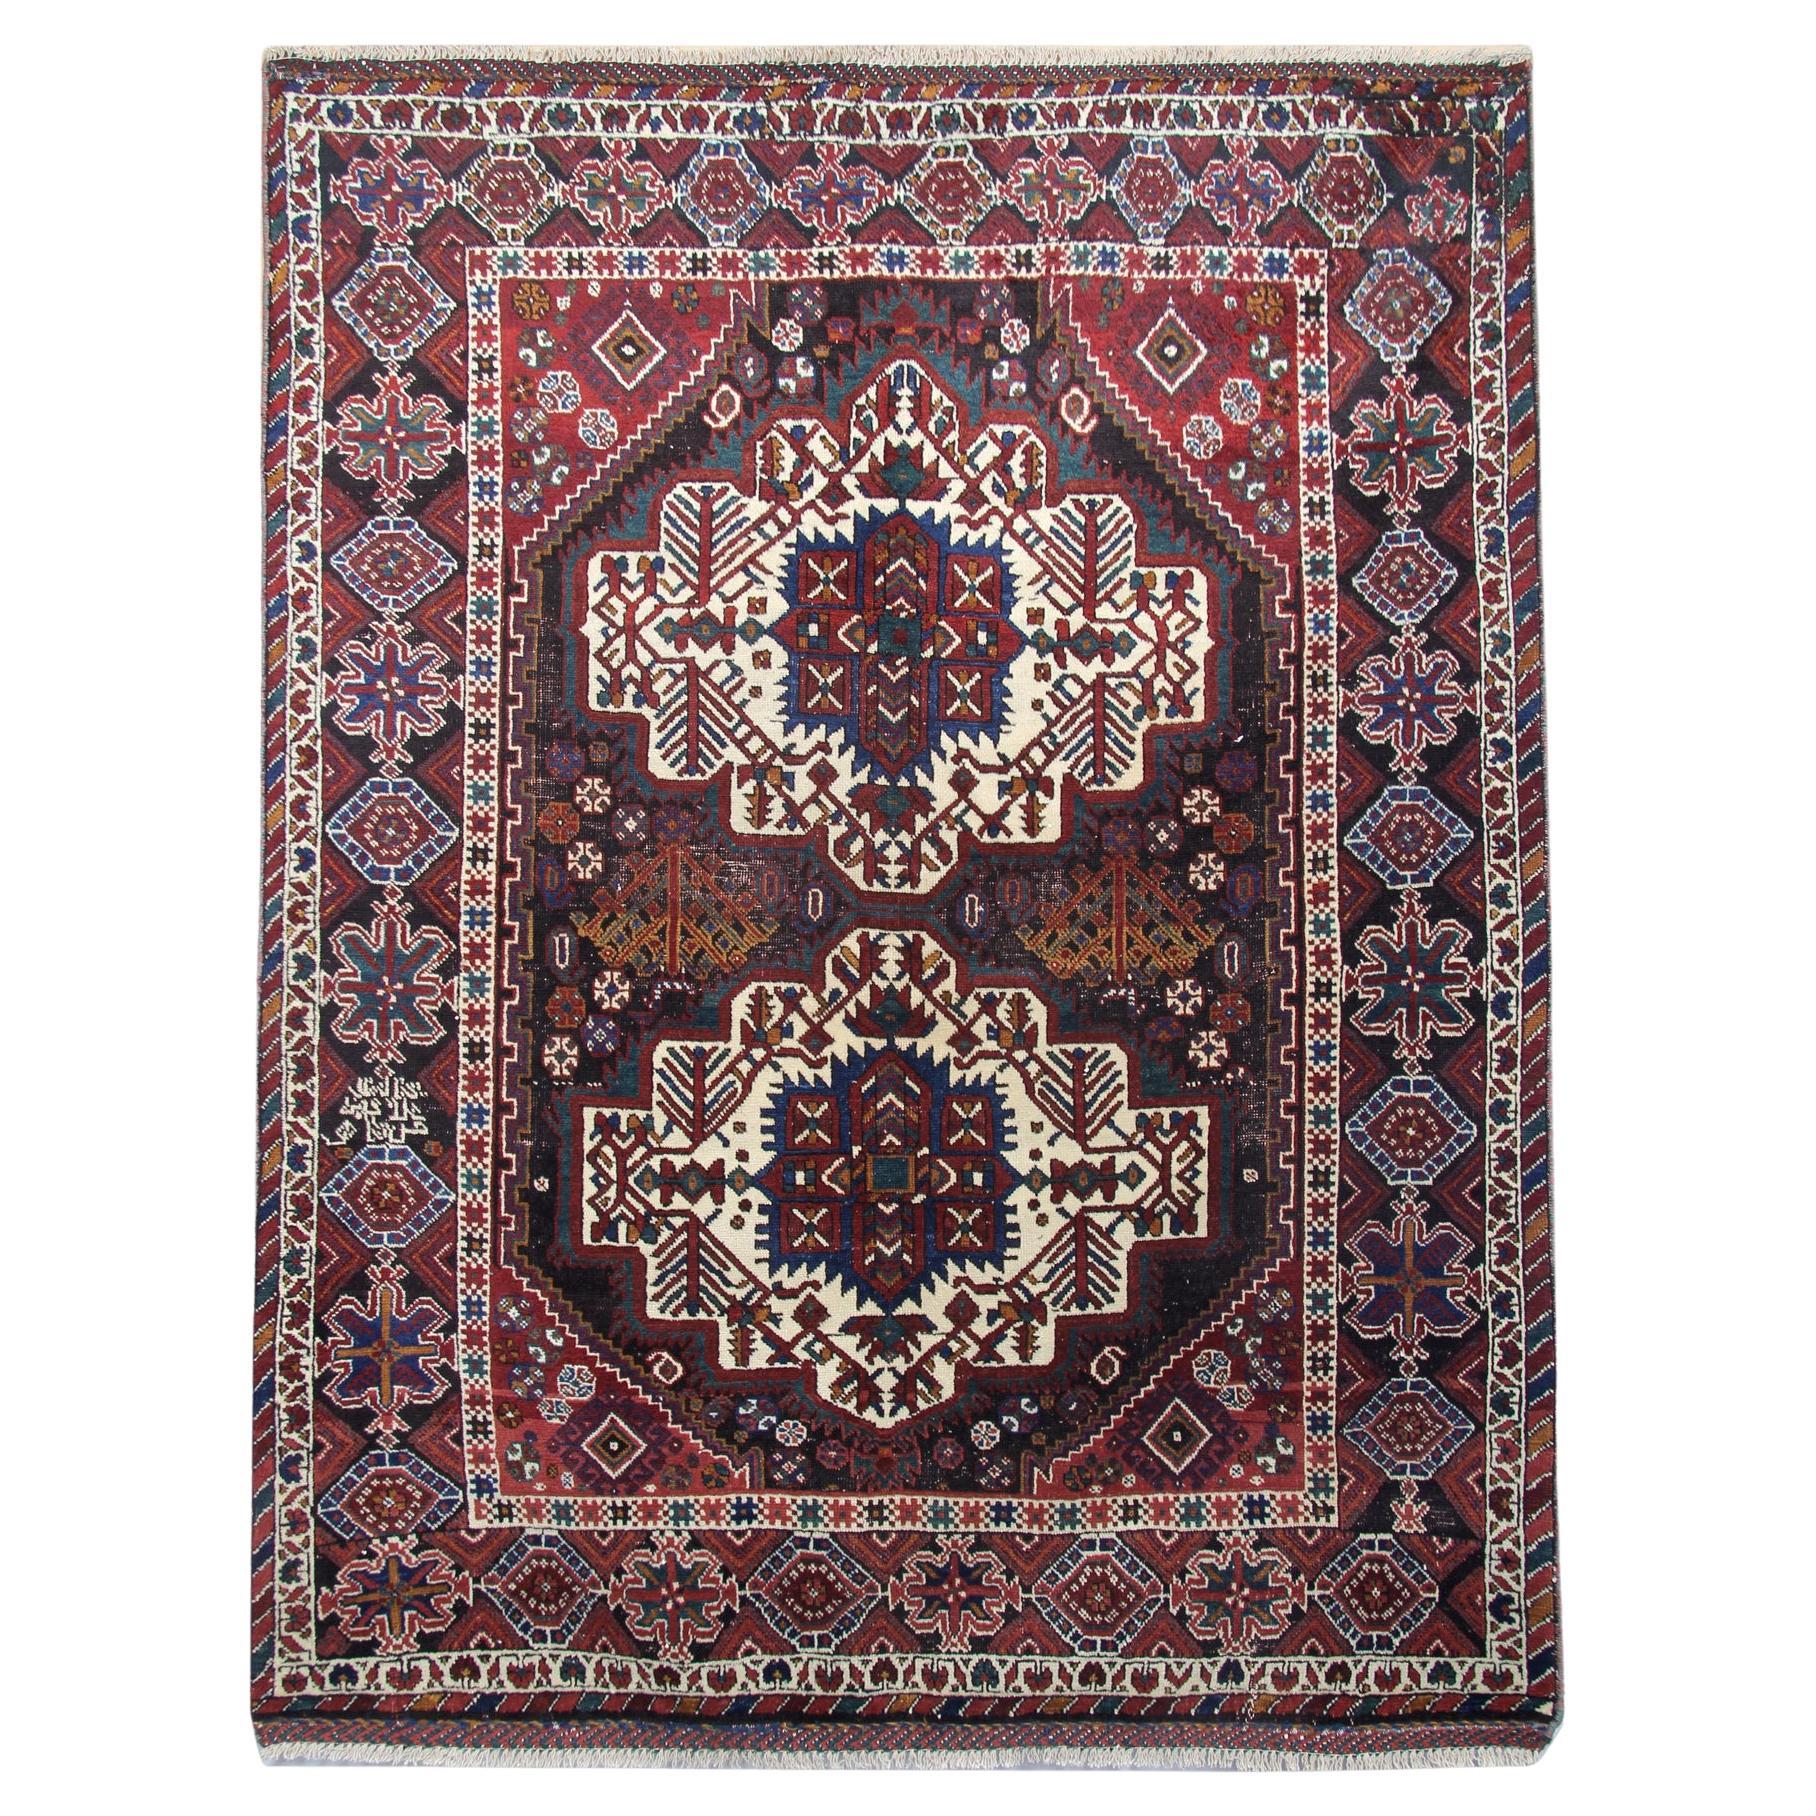 Antique Tribal Rug Handwoven Carpet Traditional Geometric Area Rug For Sale